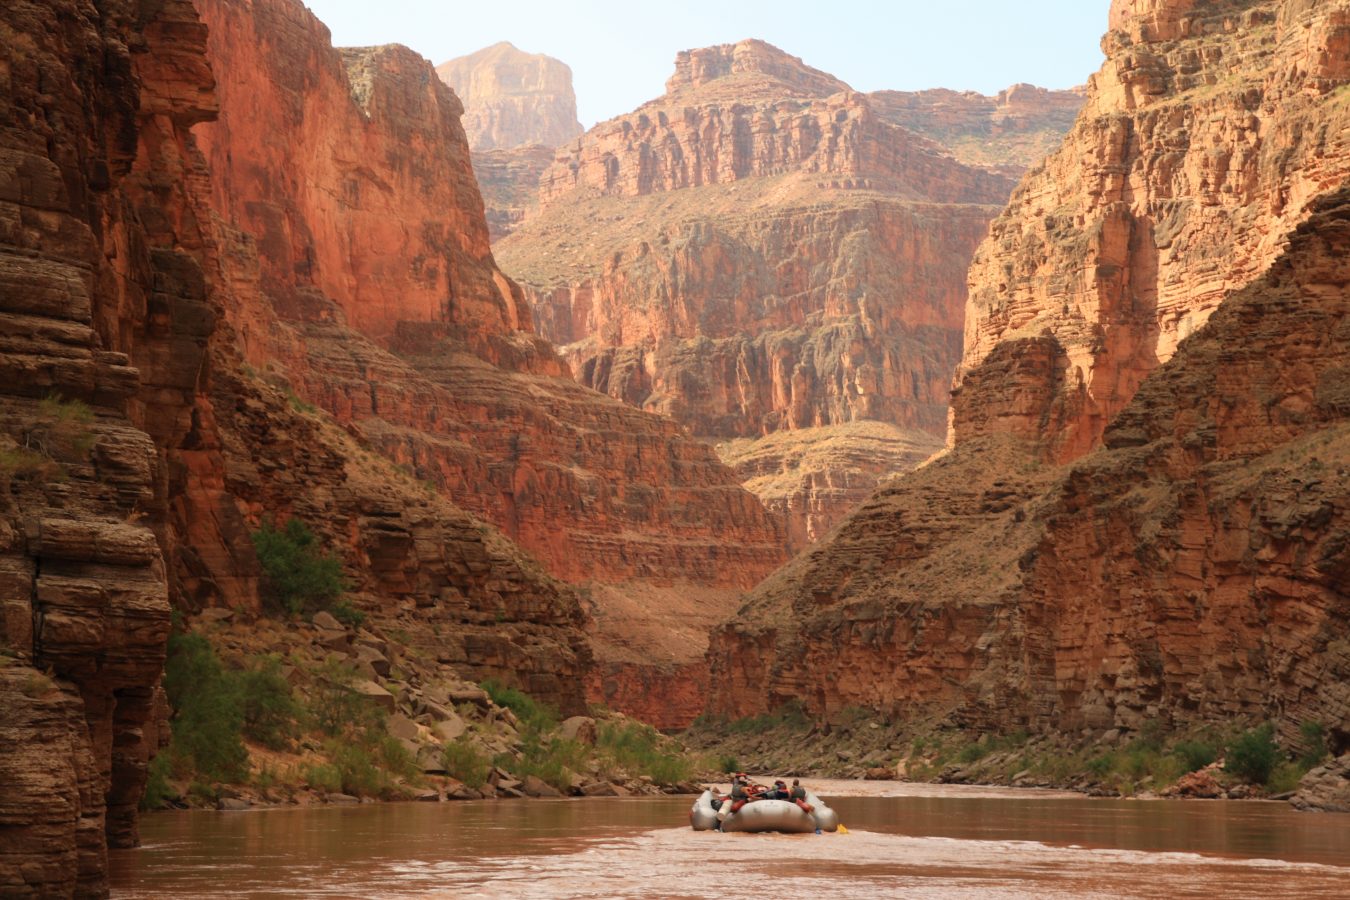 Whitewater rafting in the Grand Canyon